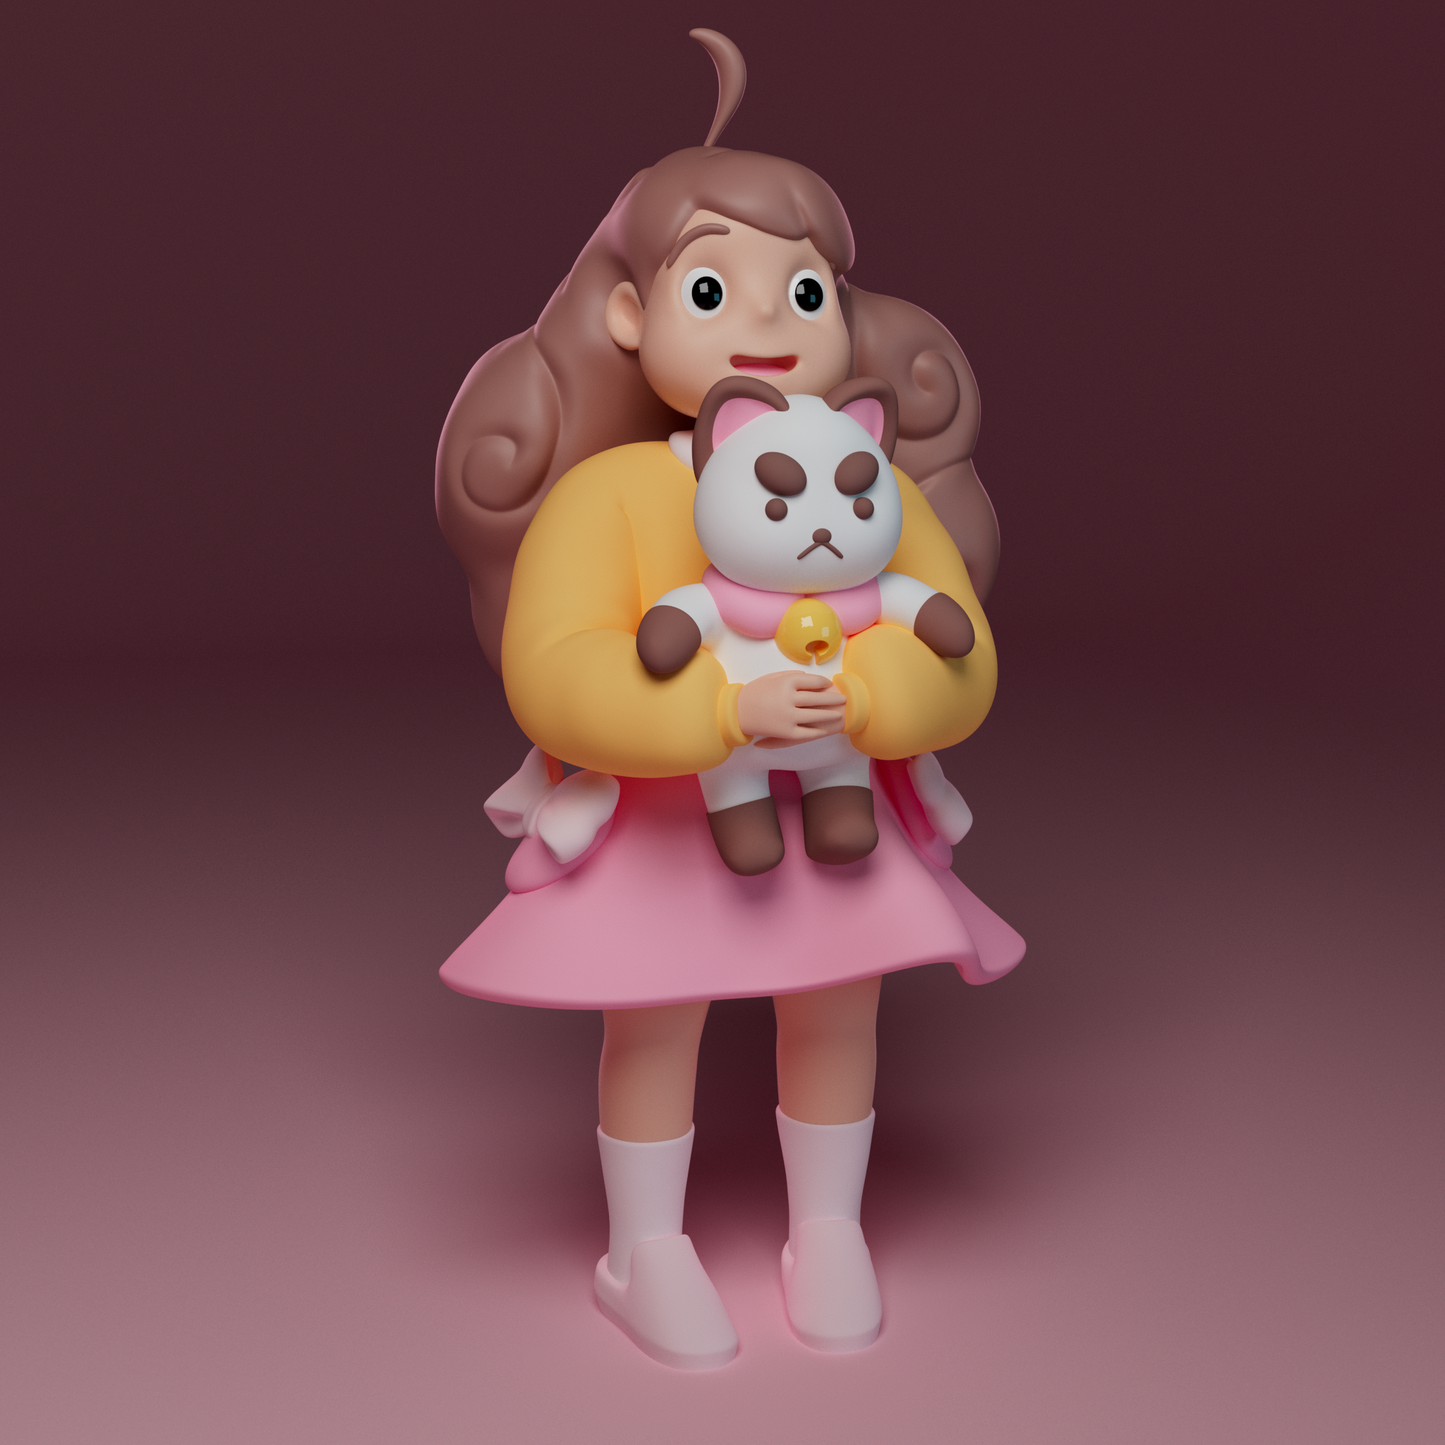 Bee And Puppycat